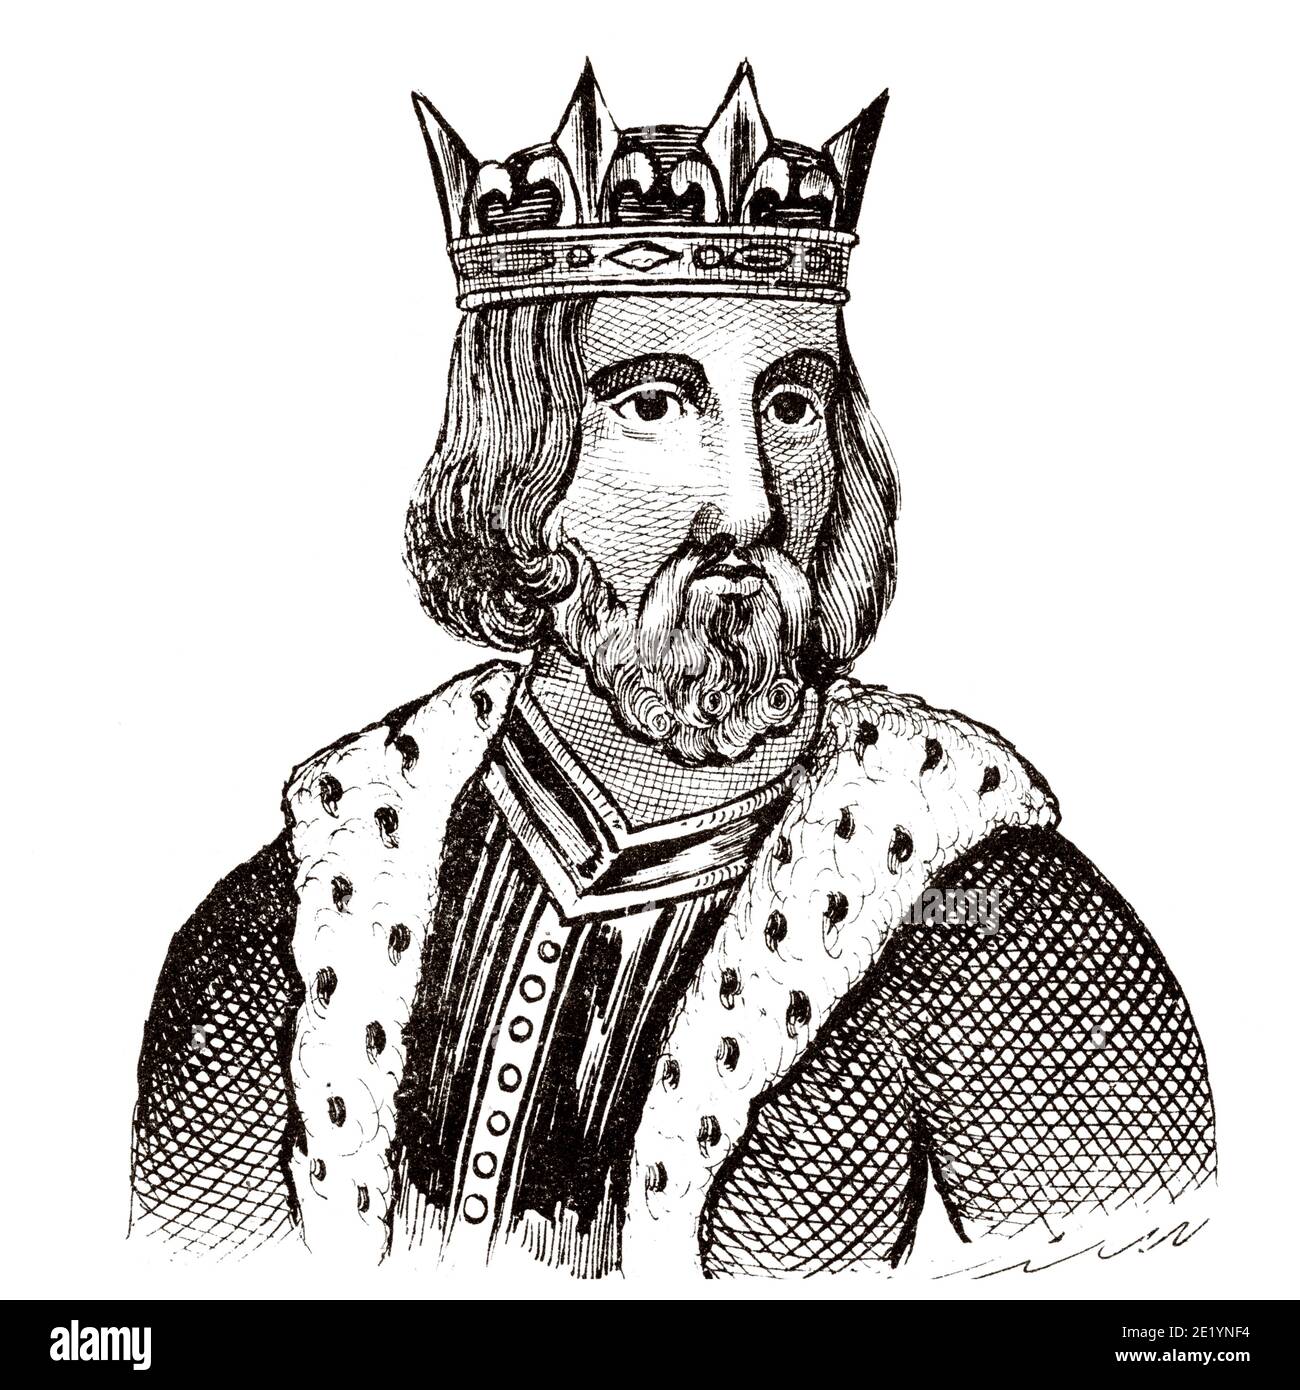 Portrait of Charles V the Wise (1337 - 1380). King of France from 1364 to 1380. House of Valois. History of France, from the book Atlas de la France 1842 Stock Photo